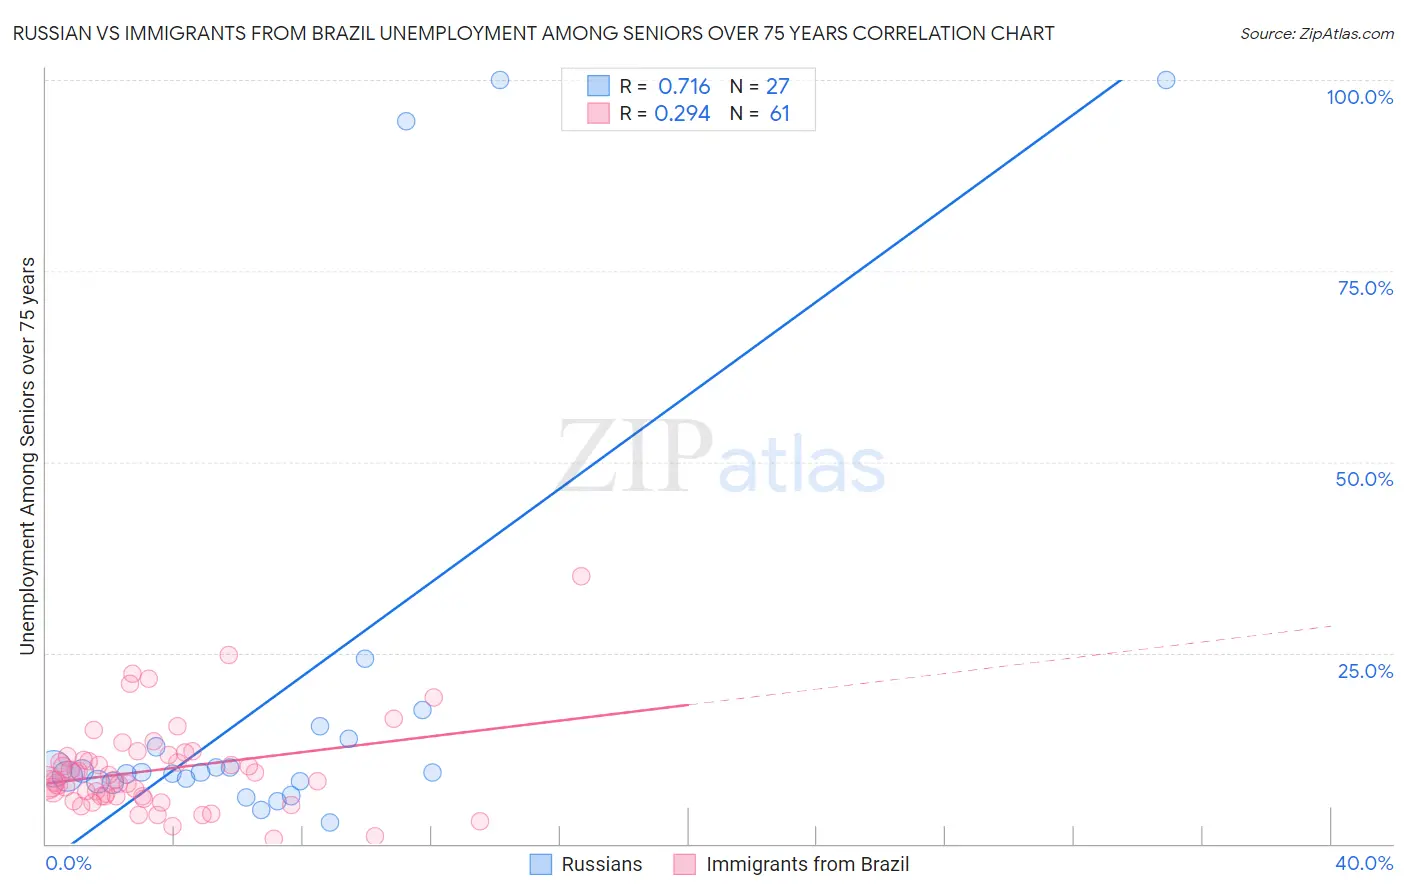 Russian vs Immigrants from Brazil Unemployment Among Seniors over 75 years